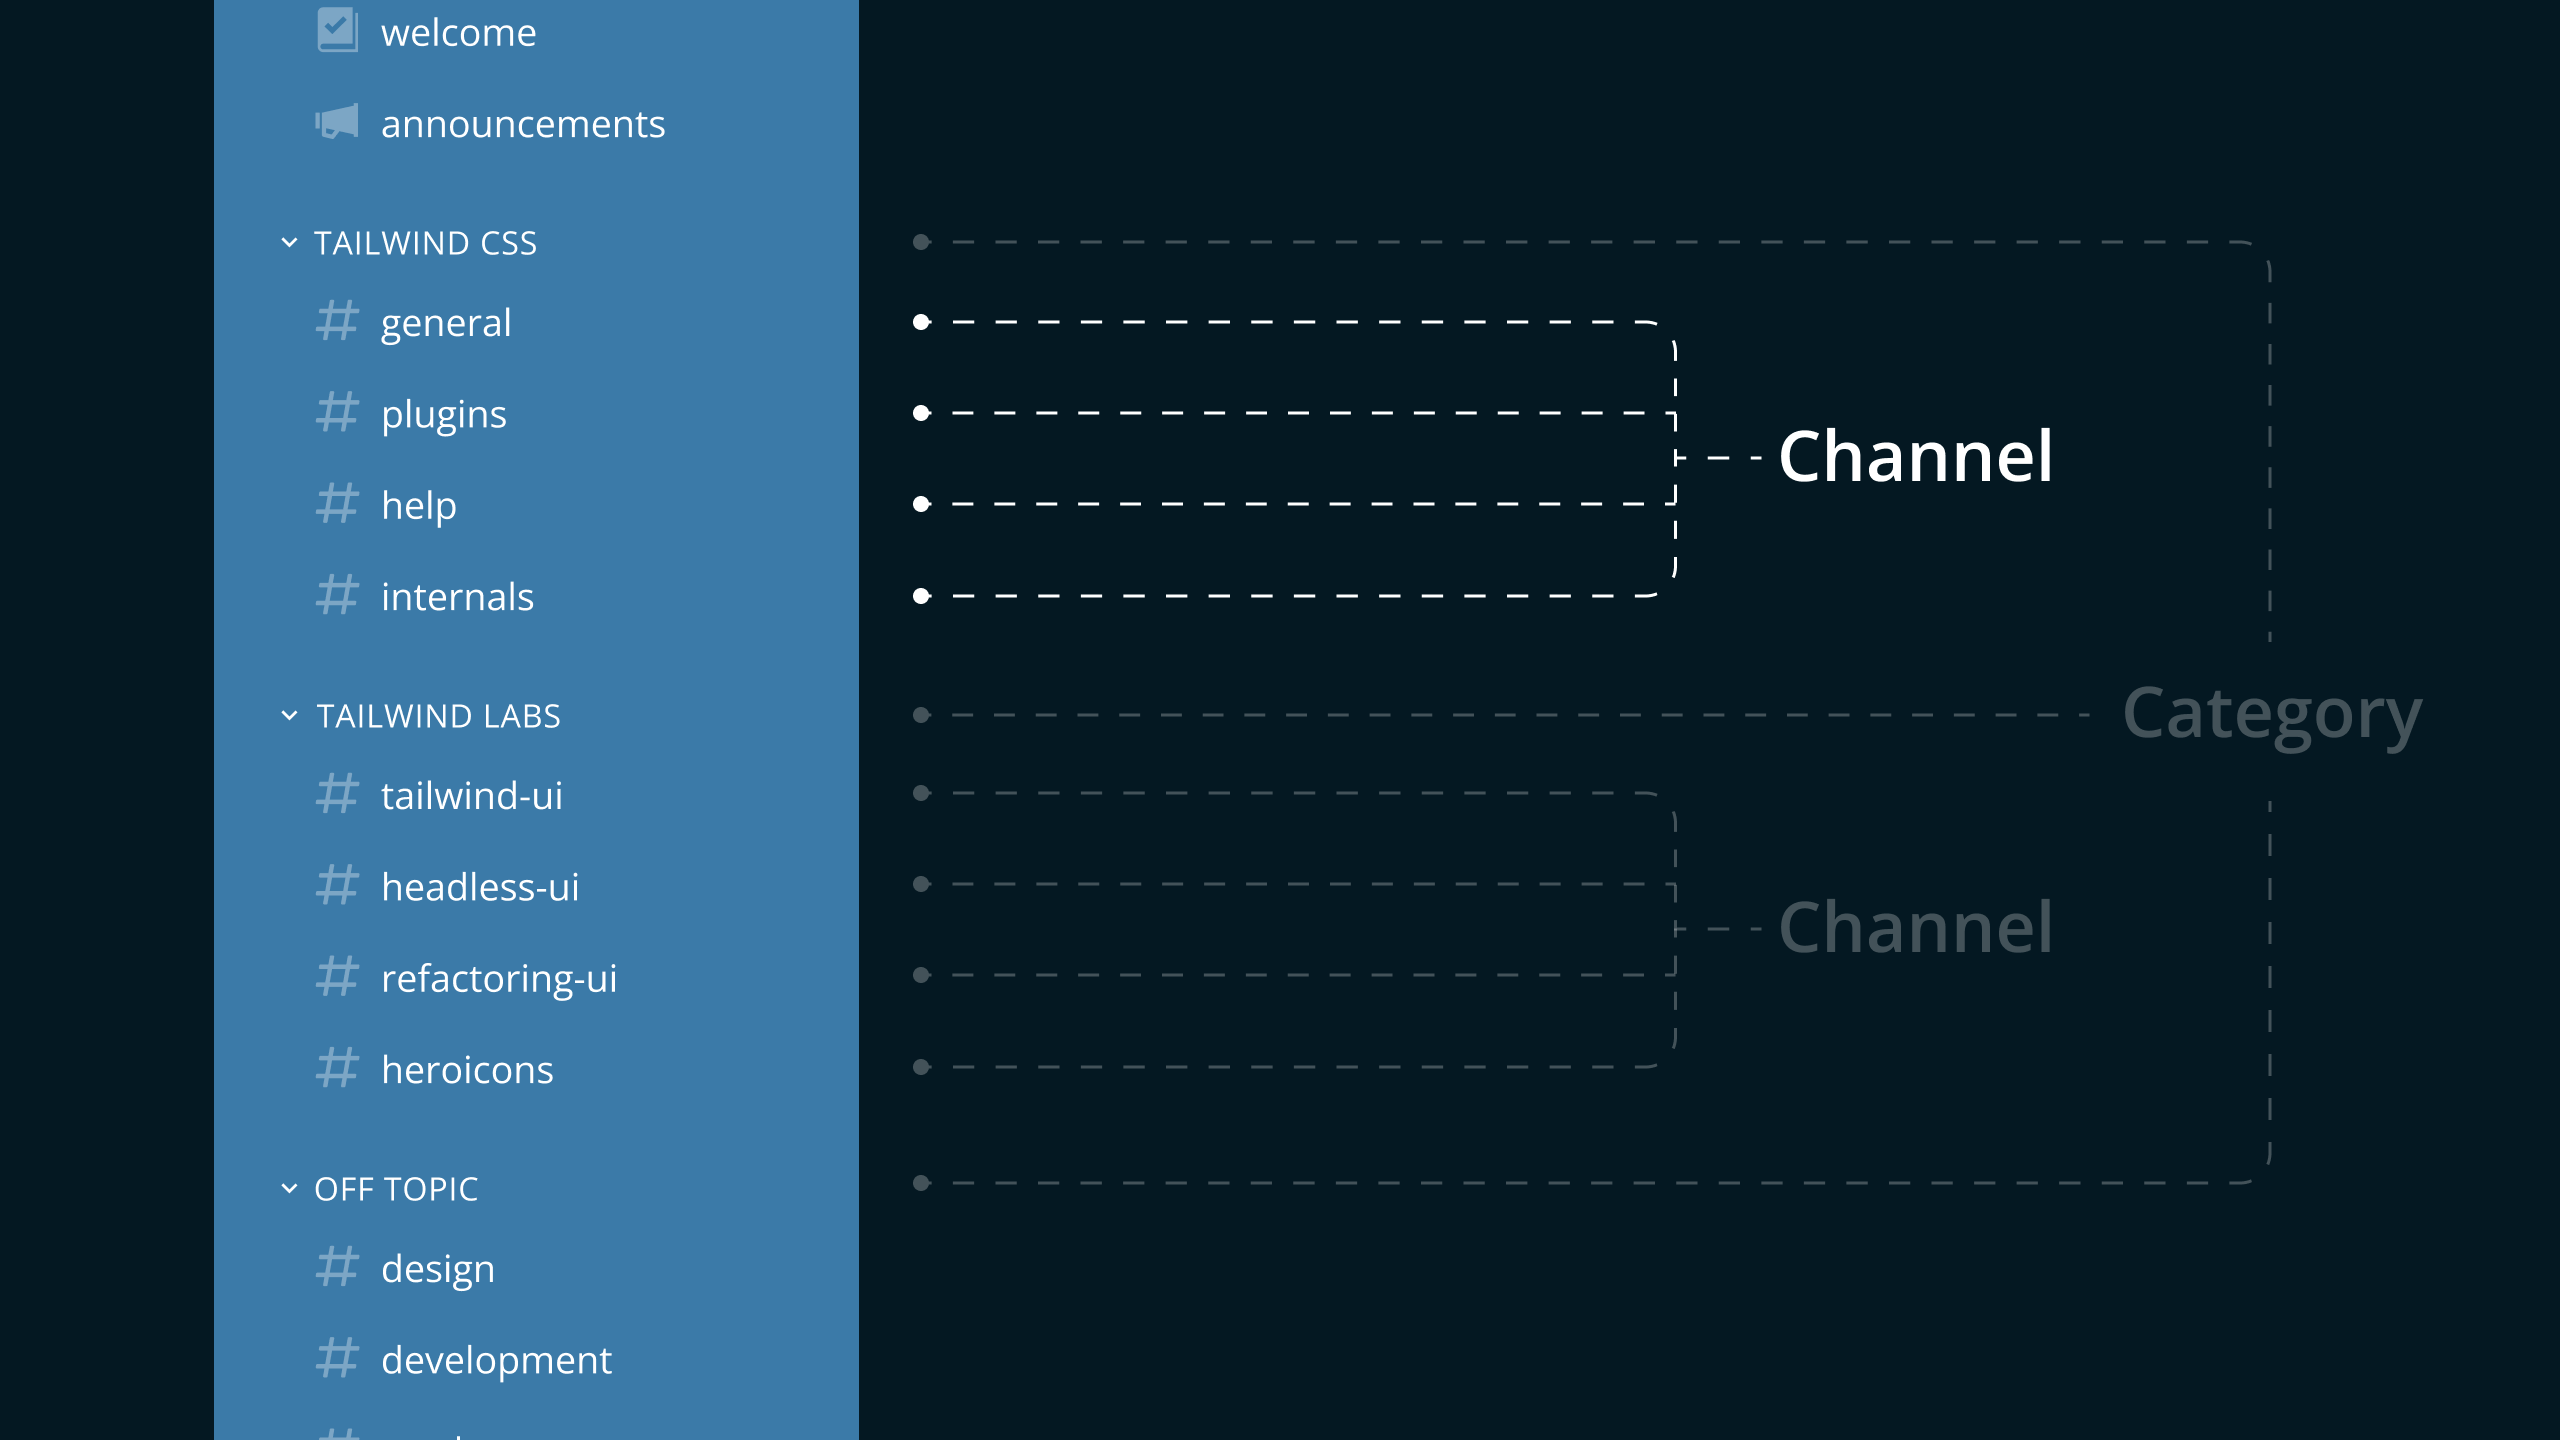 Dynamic categories and channels